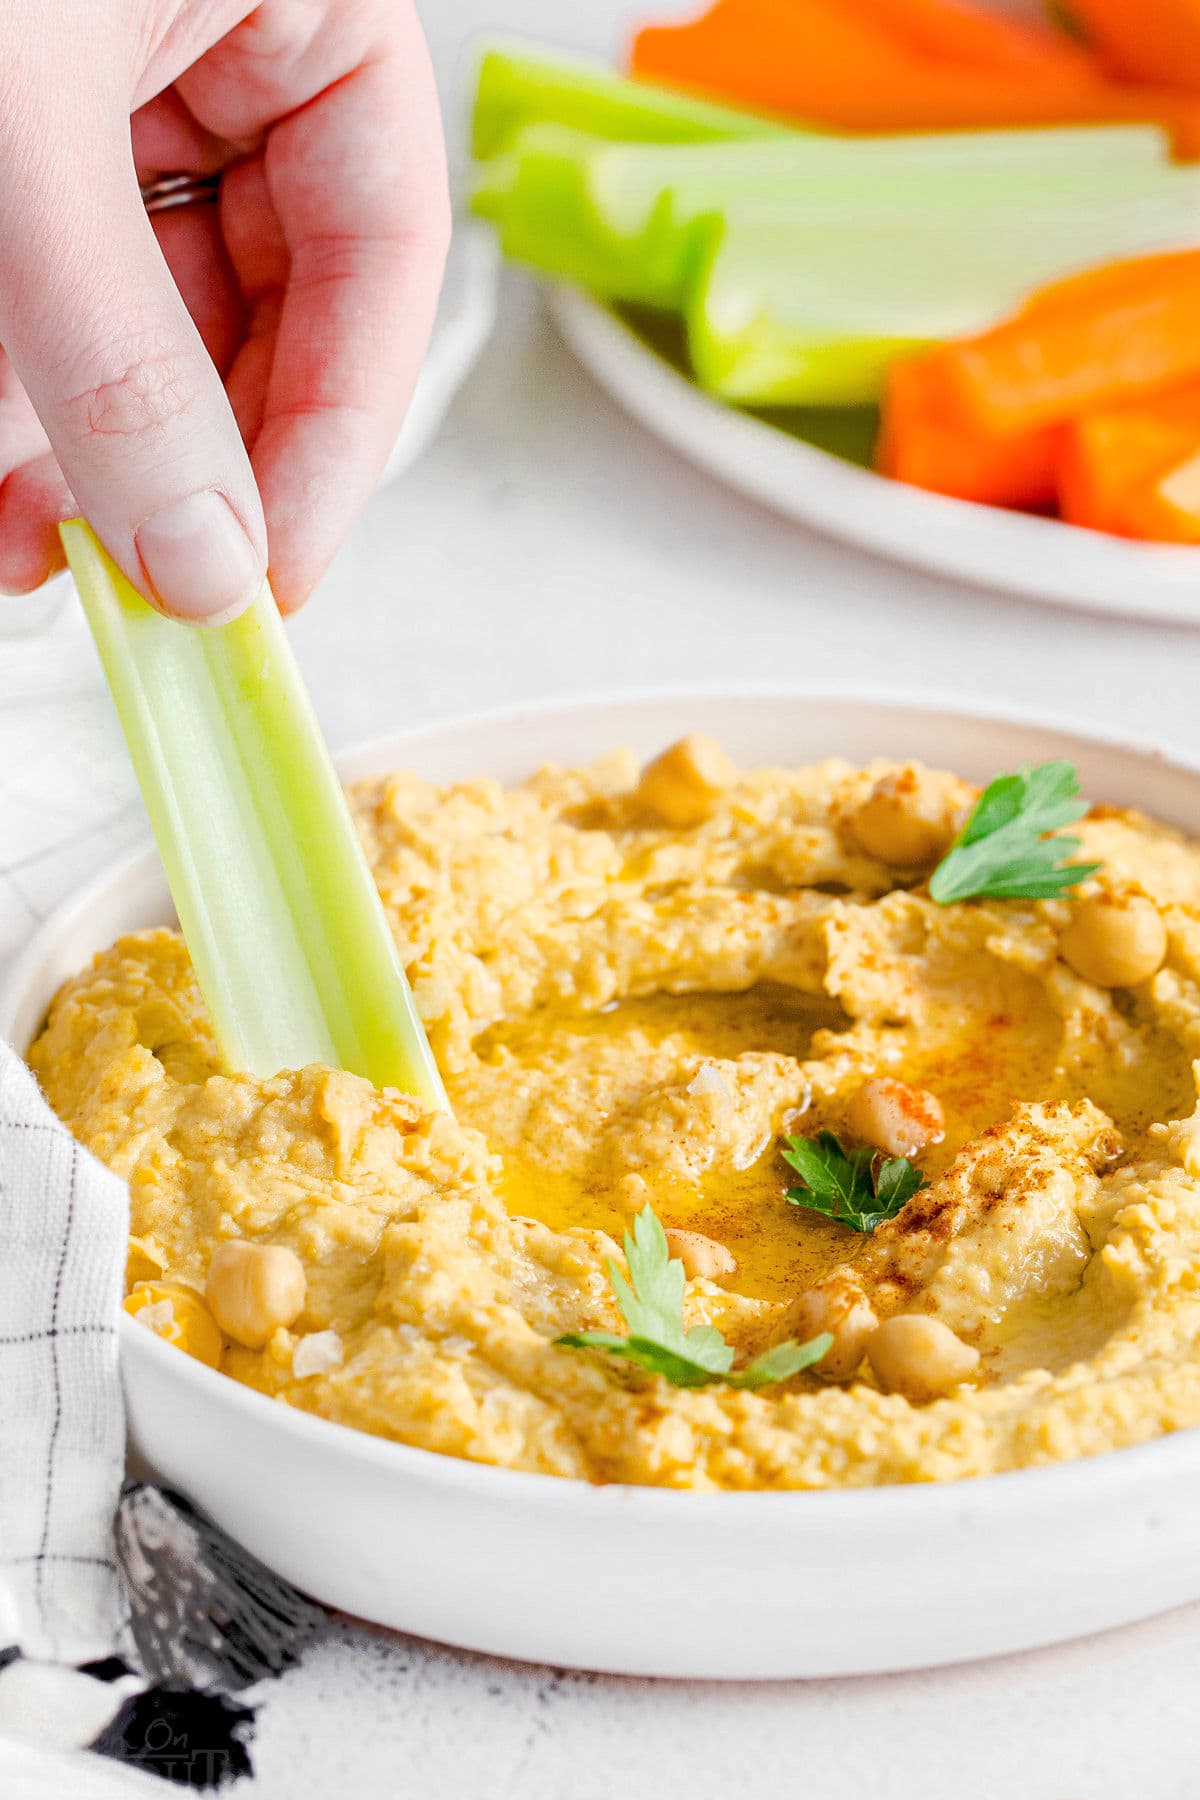 celery stick being dipped in hummus.